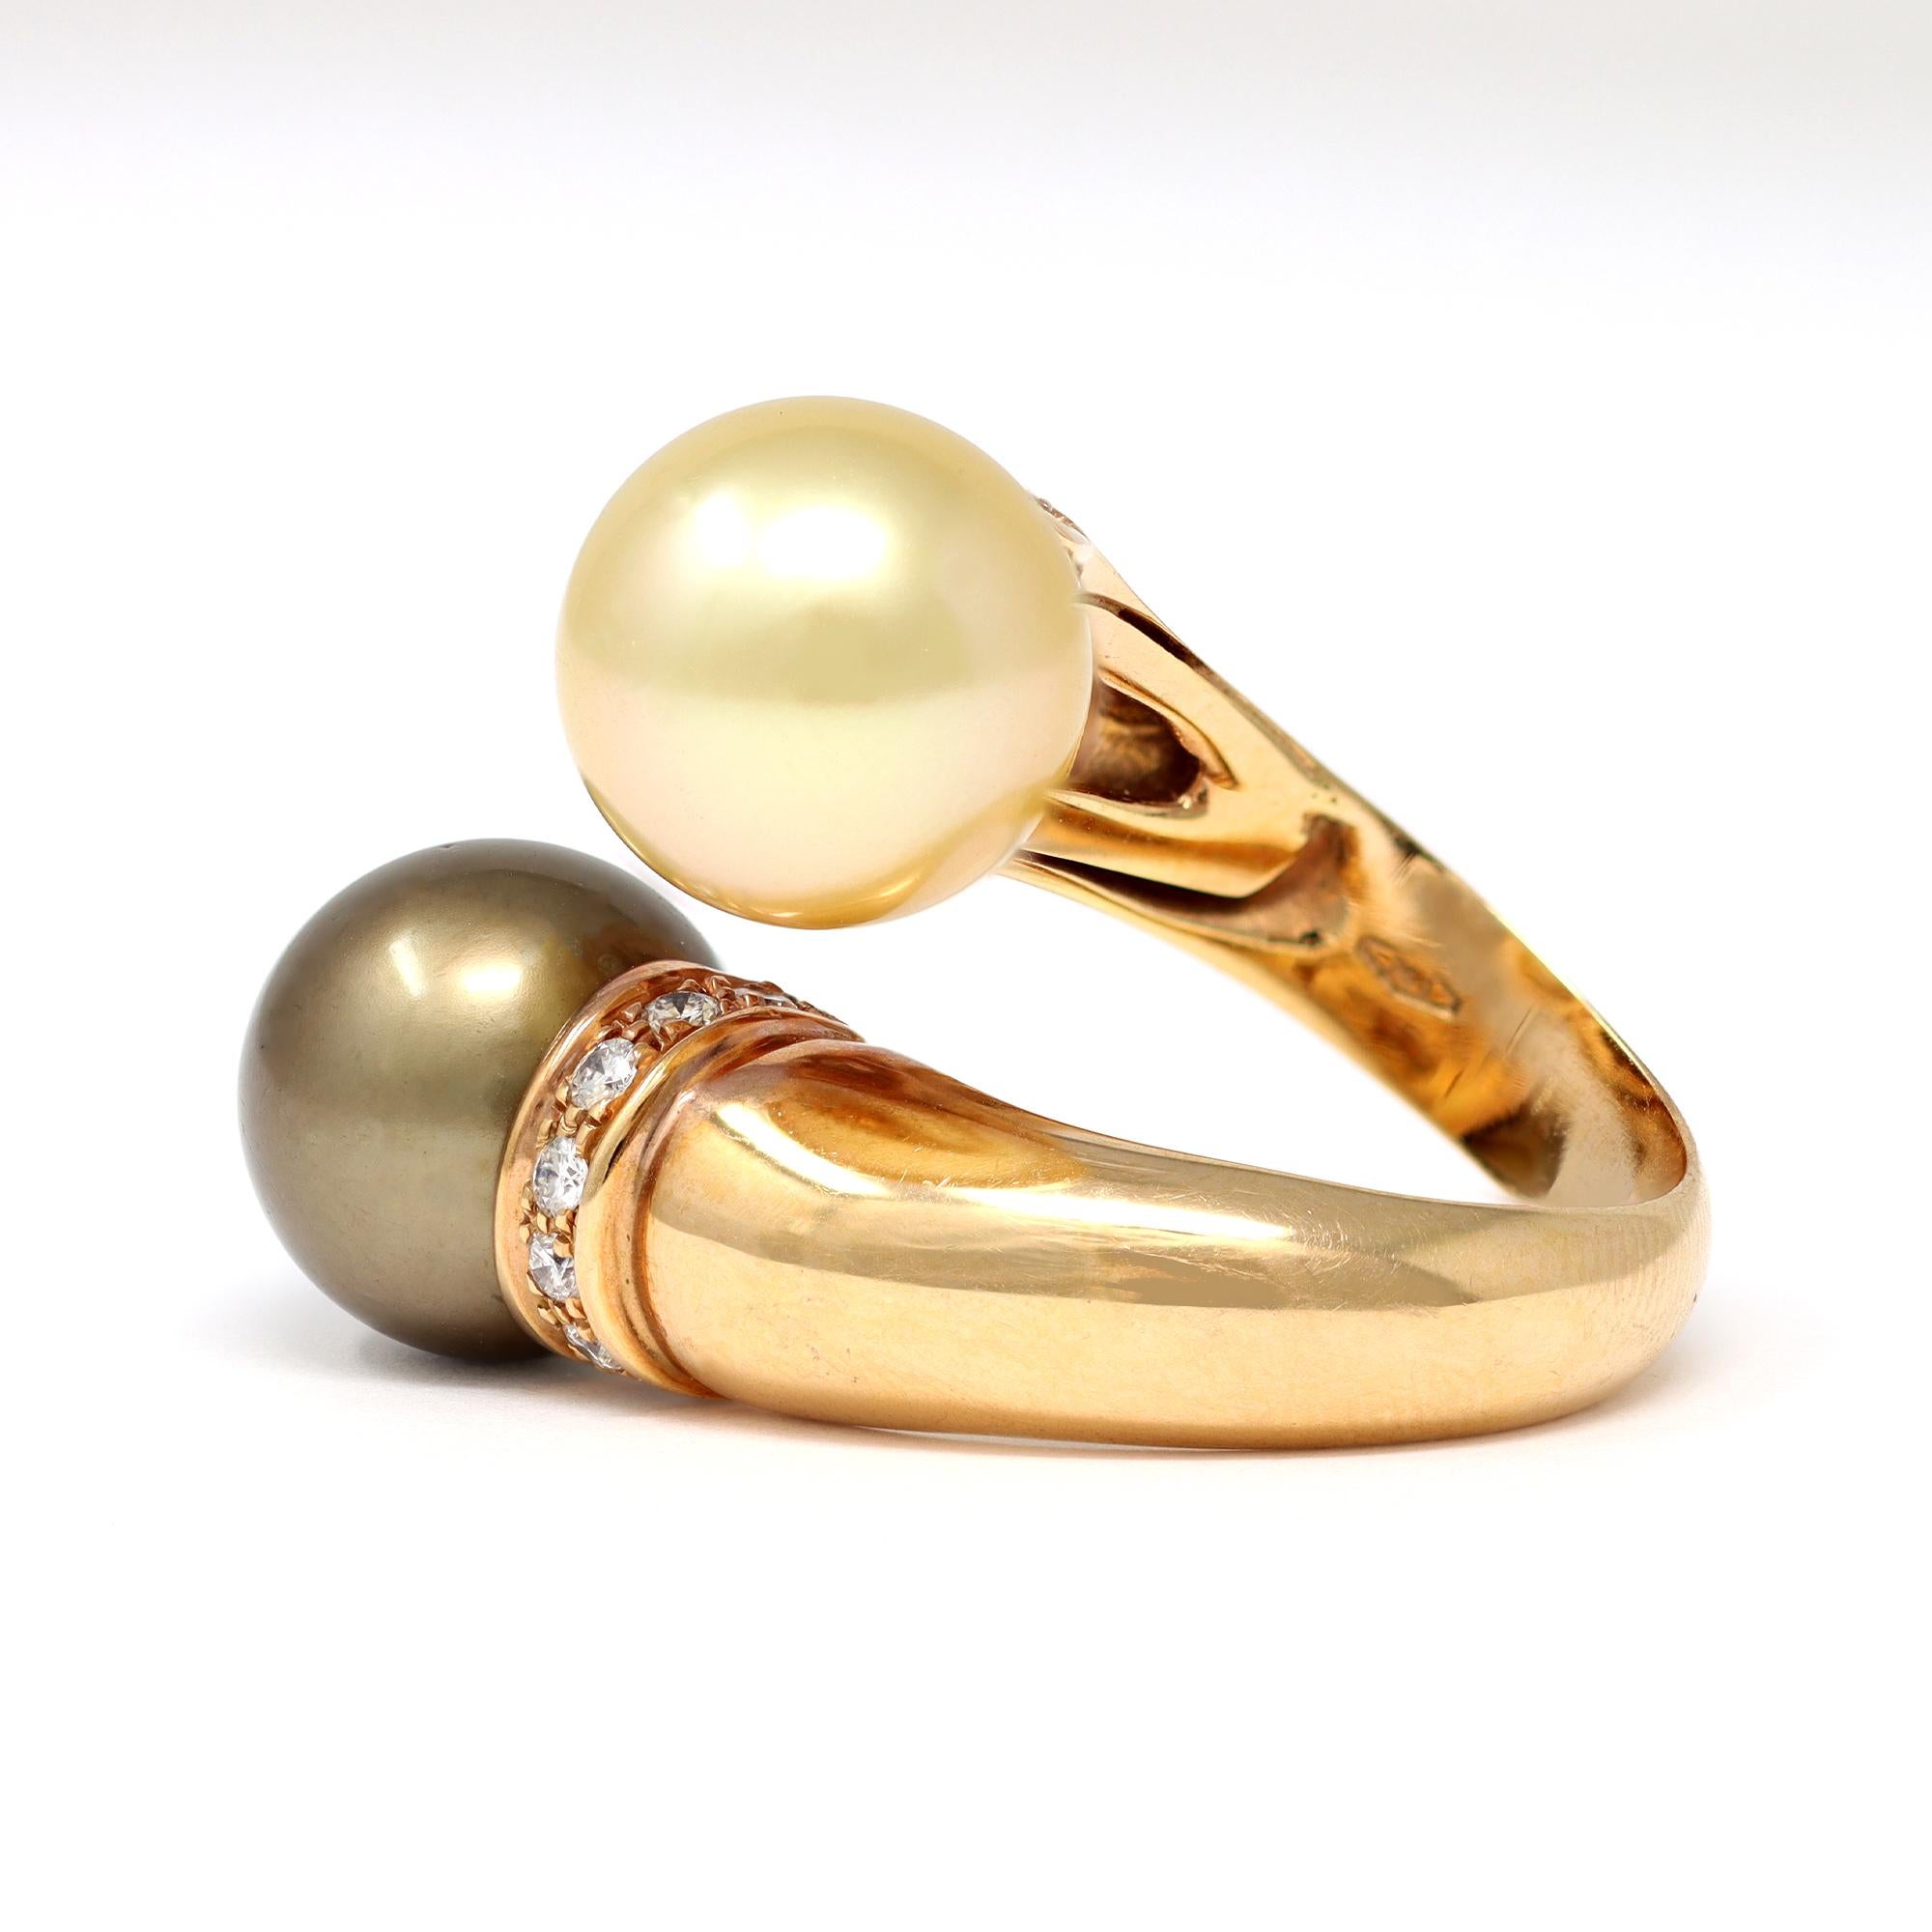 A fine by-pass ring featuring a natural gold south sea pearl and a grey Tahitian pearl with diamond accents. The ring was originated in Italy circa 2000. The round pearls measure 11 millimiter with great luster and very minor surface inclusions. The